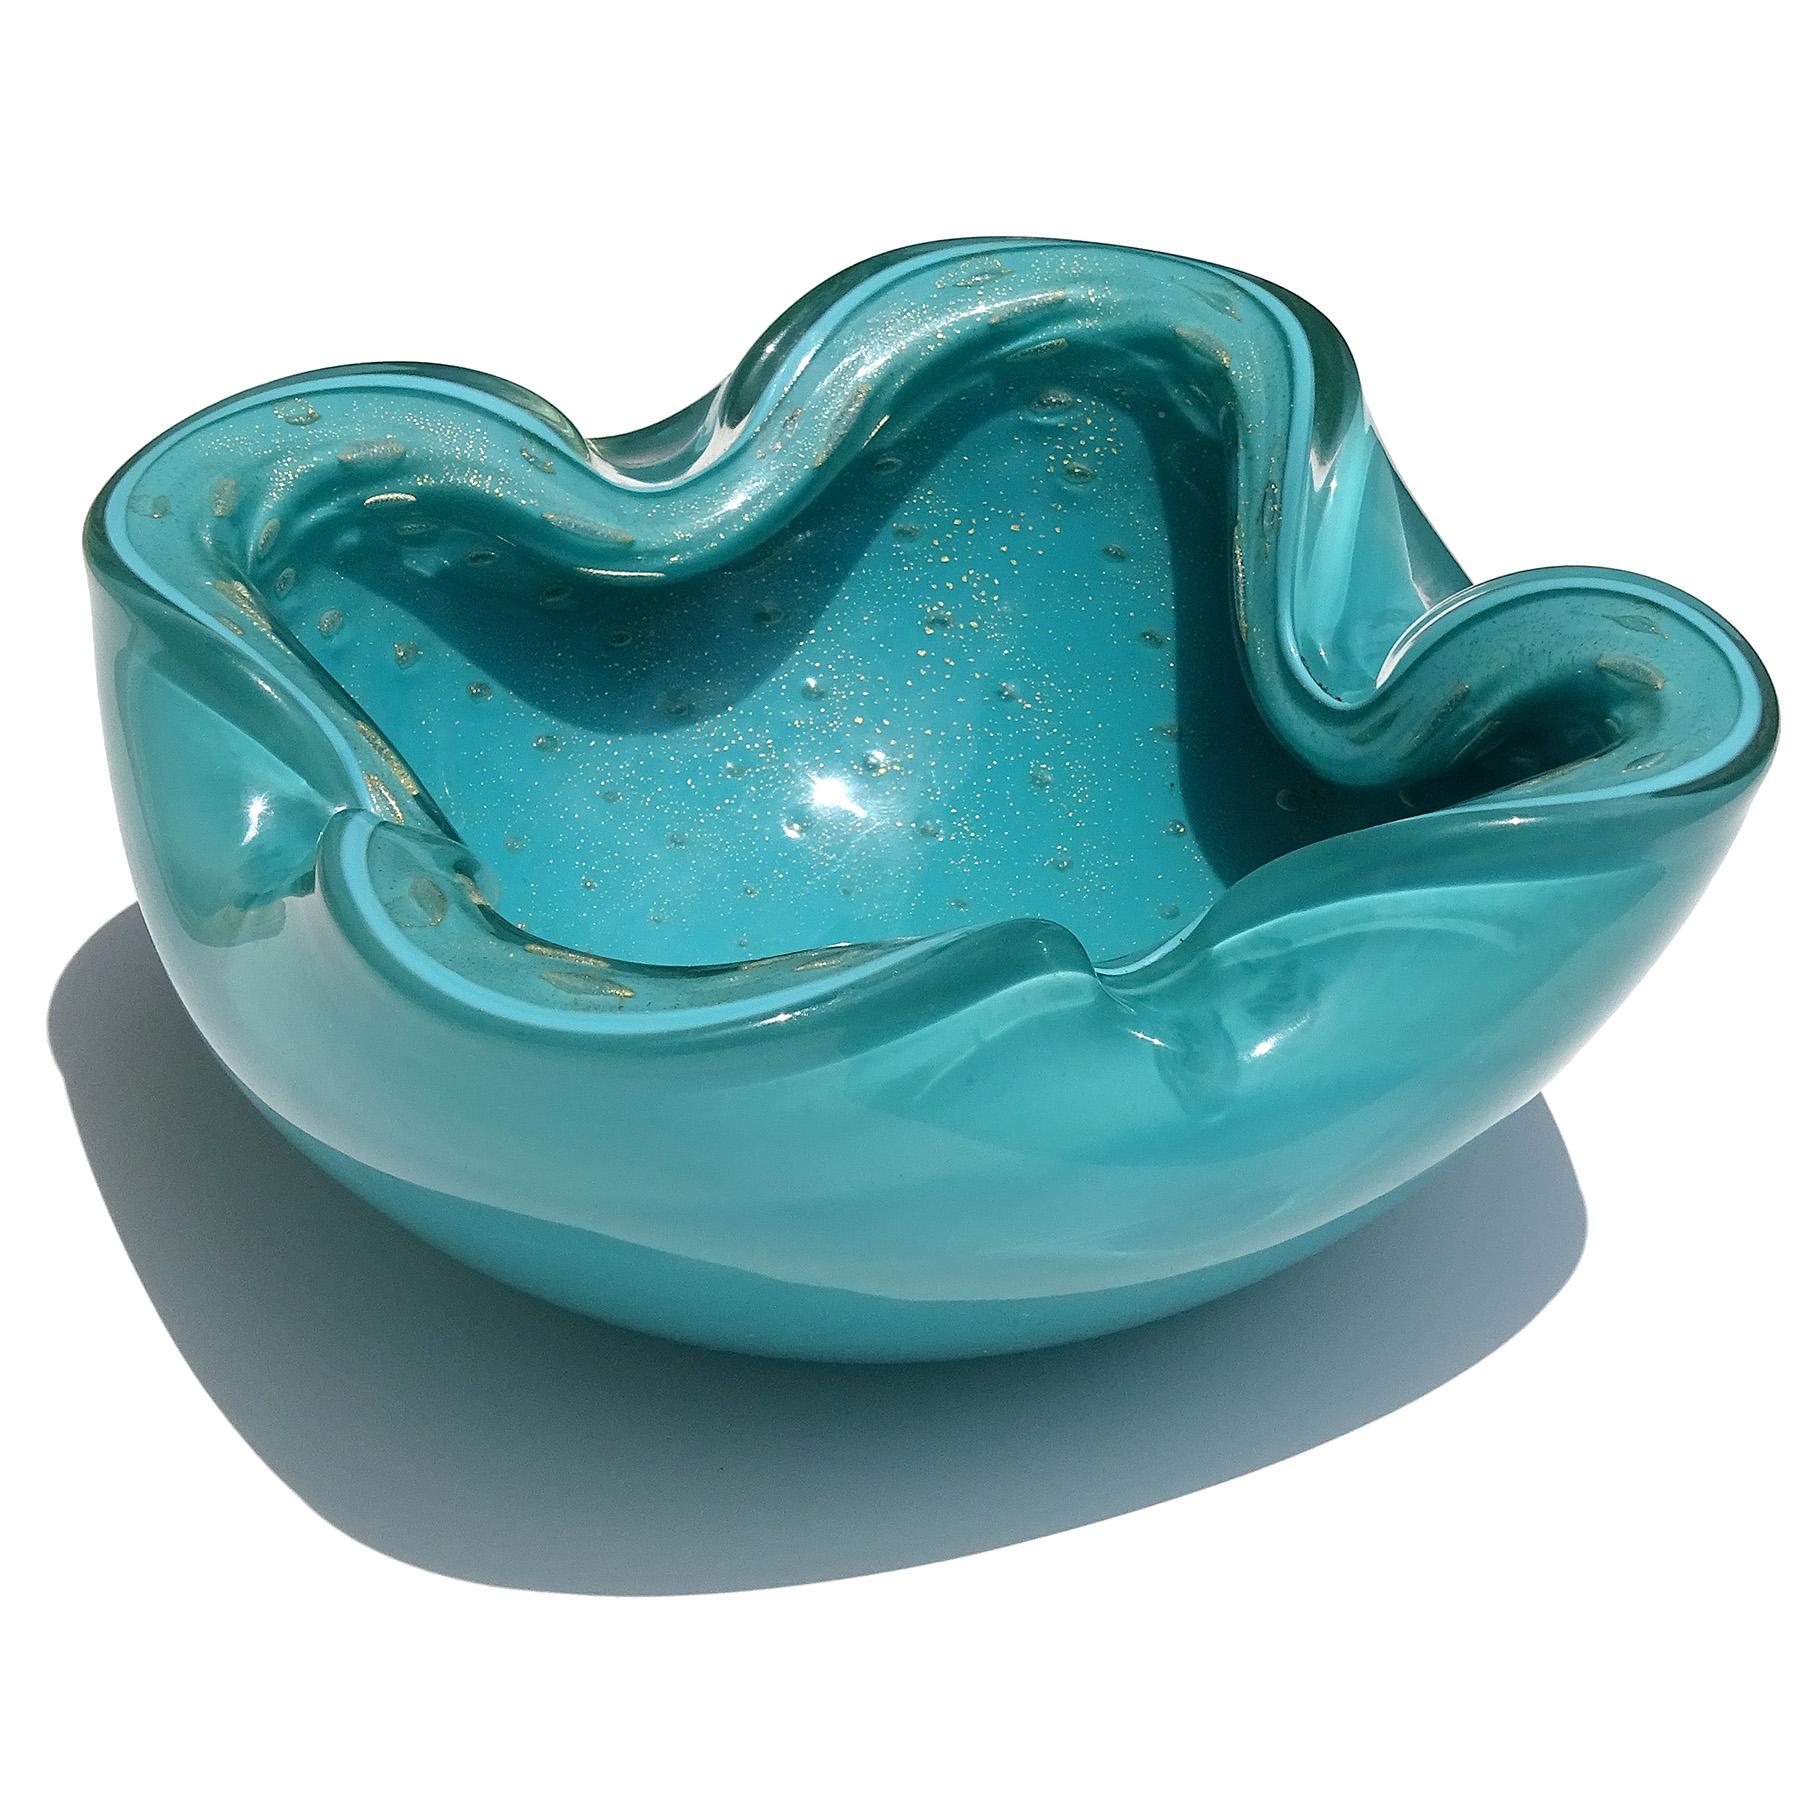 Hand-Crafted Barbini Murano Teal Blue Green Gold Fleck Bubbles Italian Art Glass Bowl Ashtray For Sale